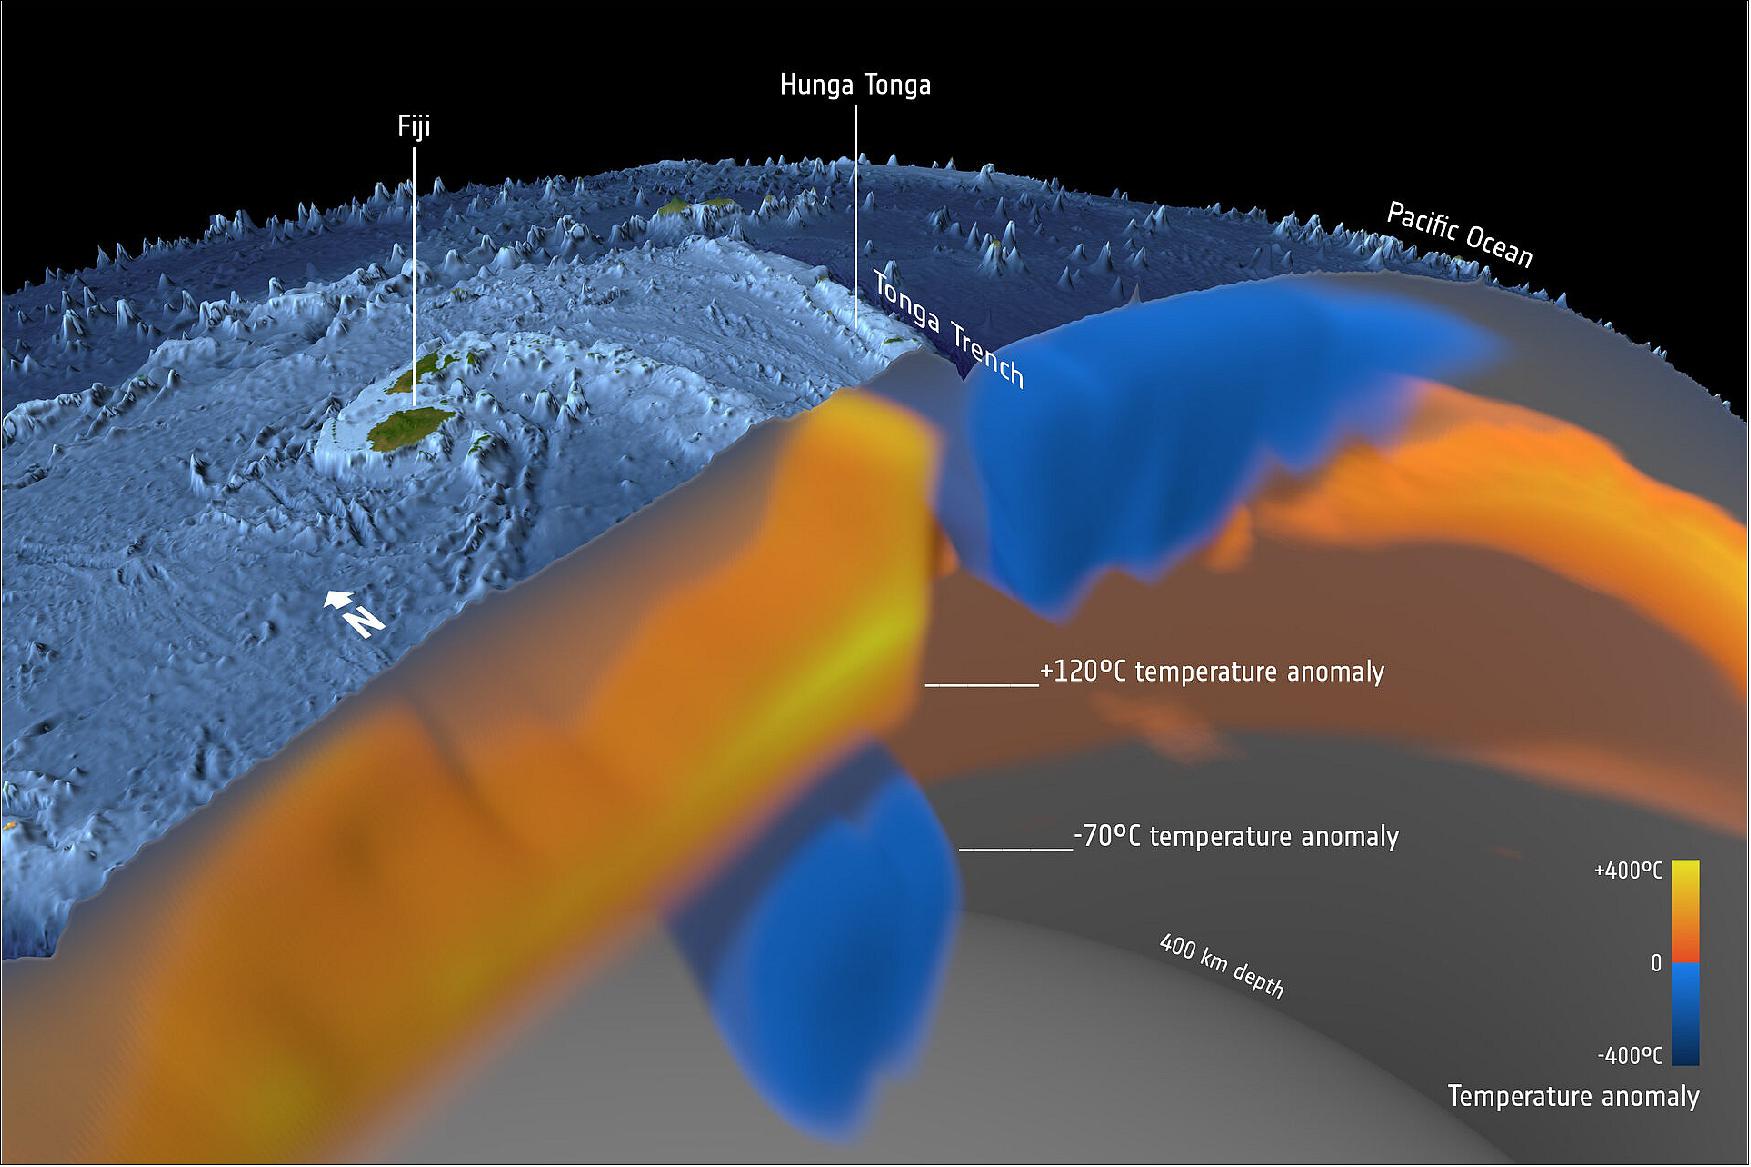 Figure 6: Hot and cold beneath Tonga volcano. The astonishing force of the Tonga volcanic eruption in January 2022 shocked the world, but the fact that this underwater volcano actually erupted came as less of a surprise to geoscientists using satellite data to study changes in the temperature deep below Earth’s surface. As part of the effort to understand the complexities of Earth’s interior, scientists working within ESA’s Science for Society 3D Earth project, have developed a state-of-the art model of the lithosphere, which is a term to describe Earth’s brittle crust and the top part of the upper mantle, and the sub-lithospheric upper mantle down to 400 km depth. The model combines different satellite data, such as gravity data from ESA’s GOCE mission, with in-situ observations, primarily seismic tomography. The model that show differences in temperature, or thermal structures, indicated that the Tonga volcano was due to erupt at some point. — The Hunga Tonga-Hunga Ha‘apai volcano is located in a back arc basin, created by the subduction of the Tonga slab. Back arc volcanoes are associated with the cold slab being melted by the mantle as the slab slides down into the mantle. It is a part of the Tonga–Kermadec arc, where the edge of the Pacific tectonic plate dives beneath the Australian Plate. Here, seismic tomography shows the layer of hydrated, partially molten rock above the plunging Pacific Plate, which feeds the volcanoes of the arc (image credit: ESA/Planetary Visions)